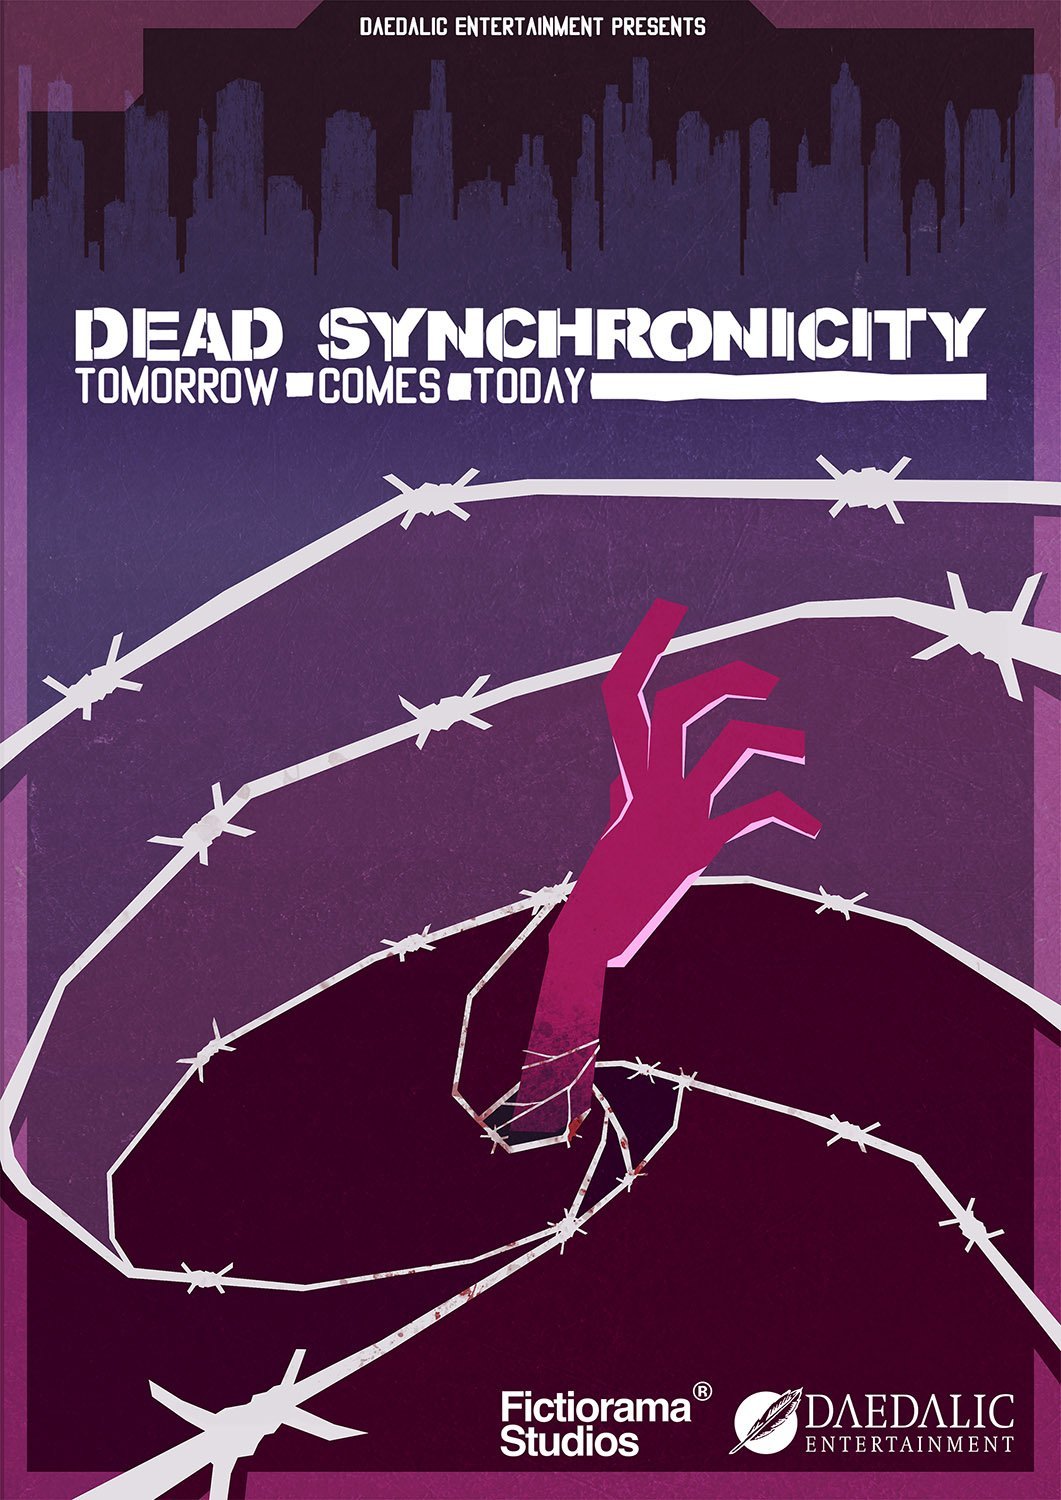 Dead Synchronicity: Tomorrow Comes Today v.1.0.10 [GOG] (2015)